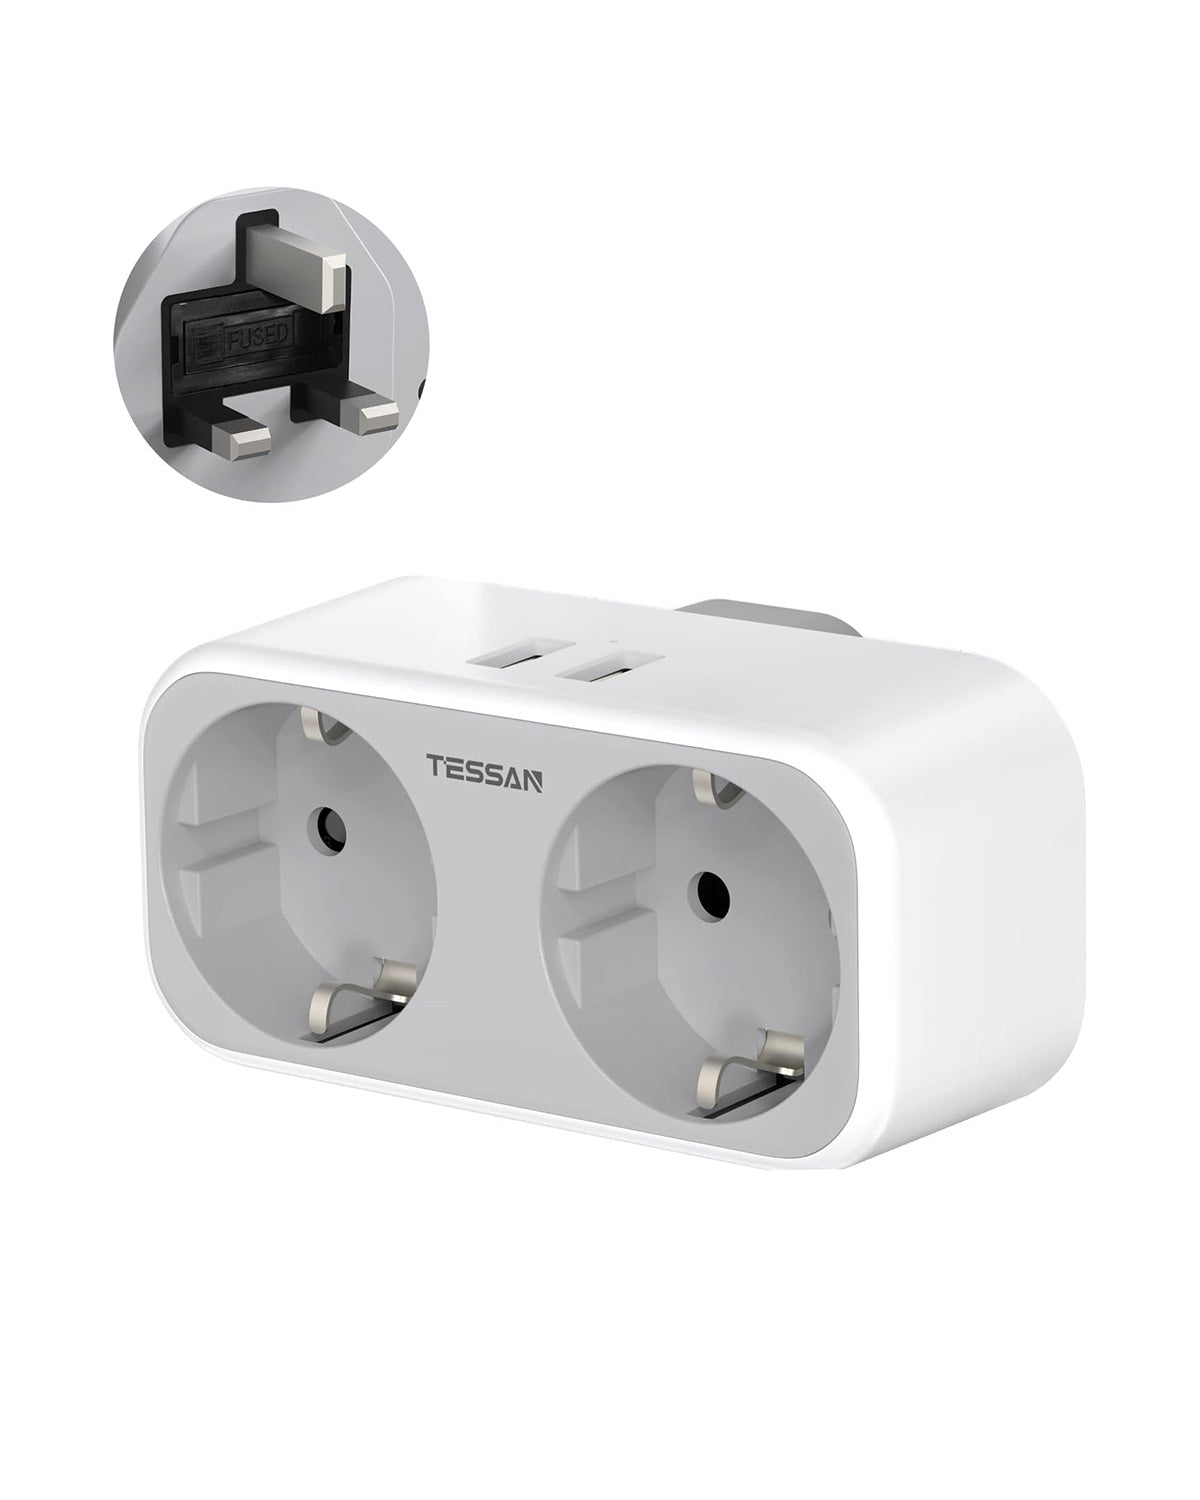 EU to UK Plug Adapter with 2 Outlets 2 USB Ports